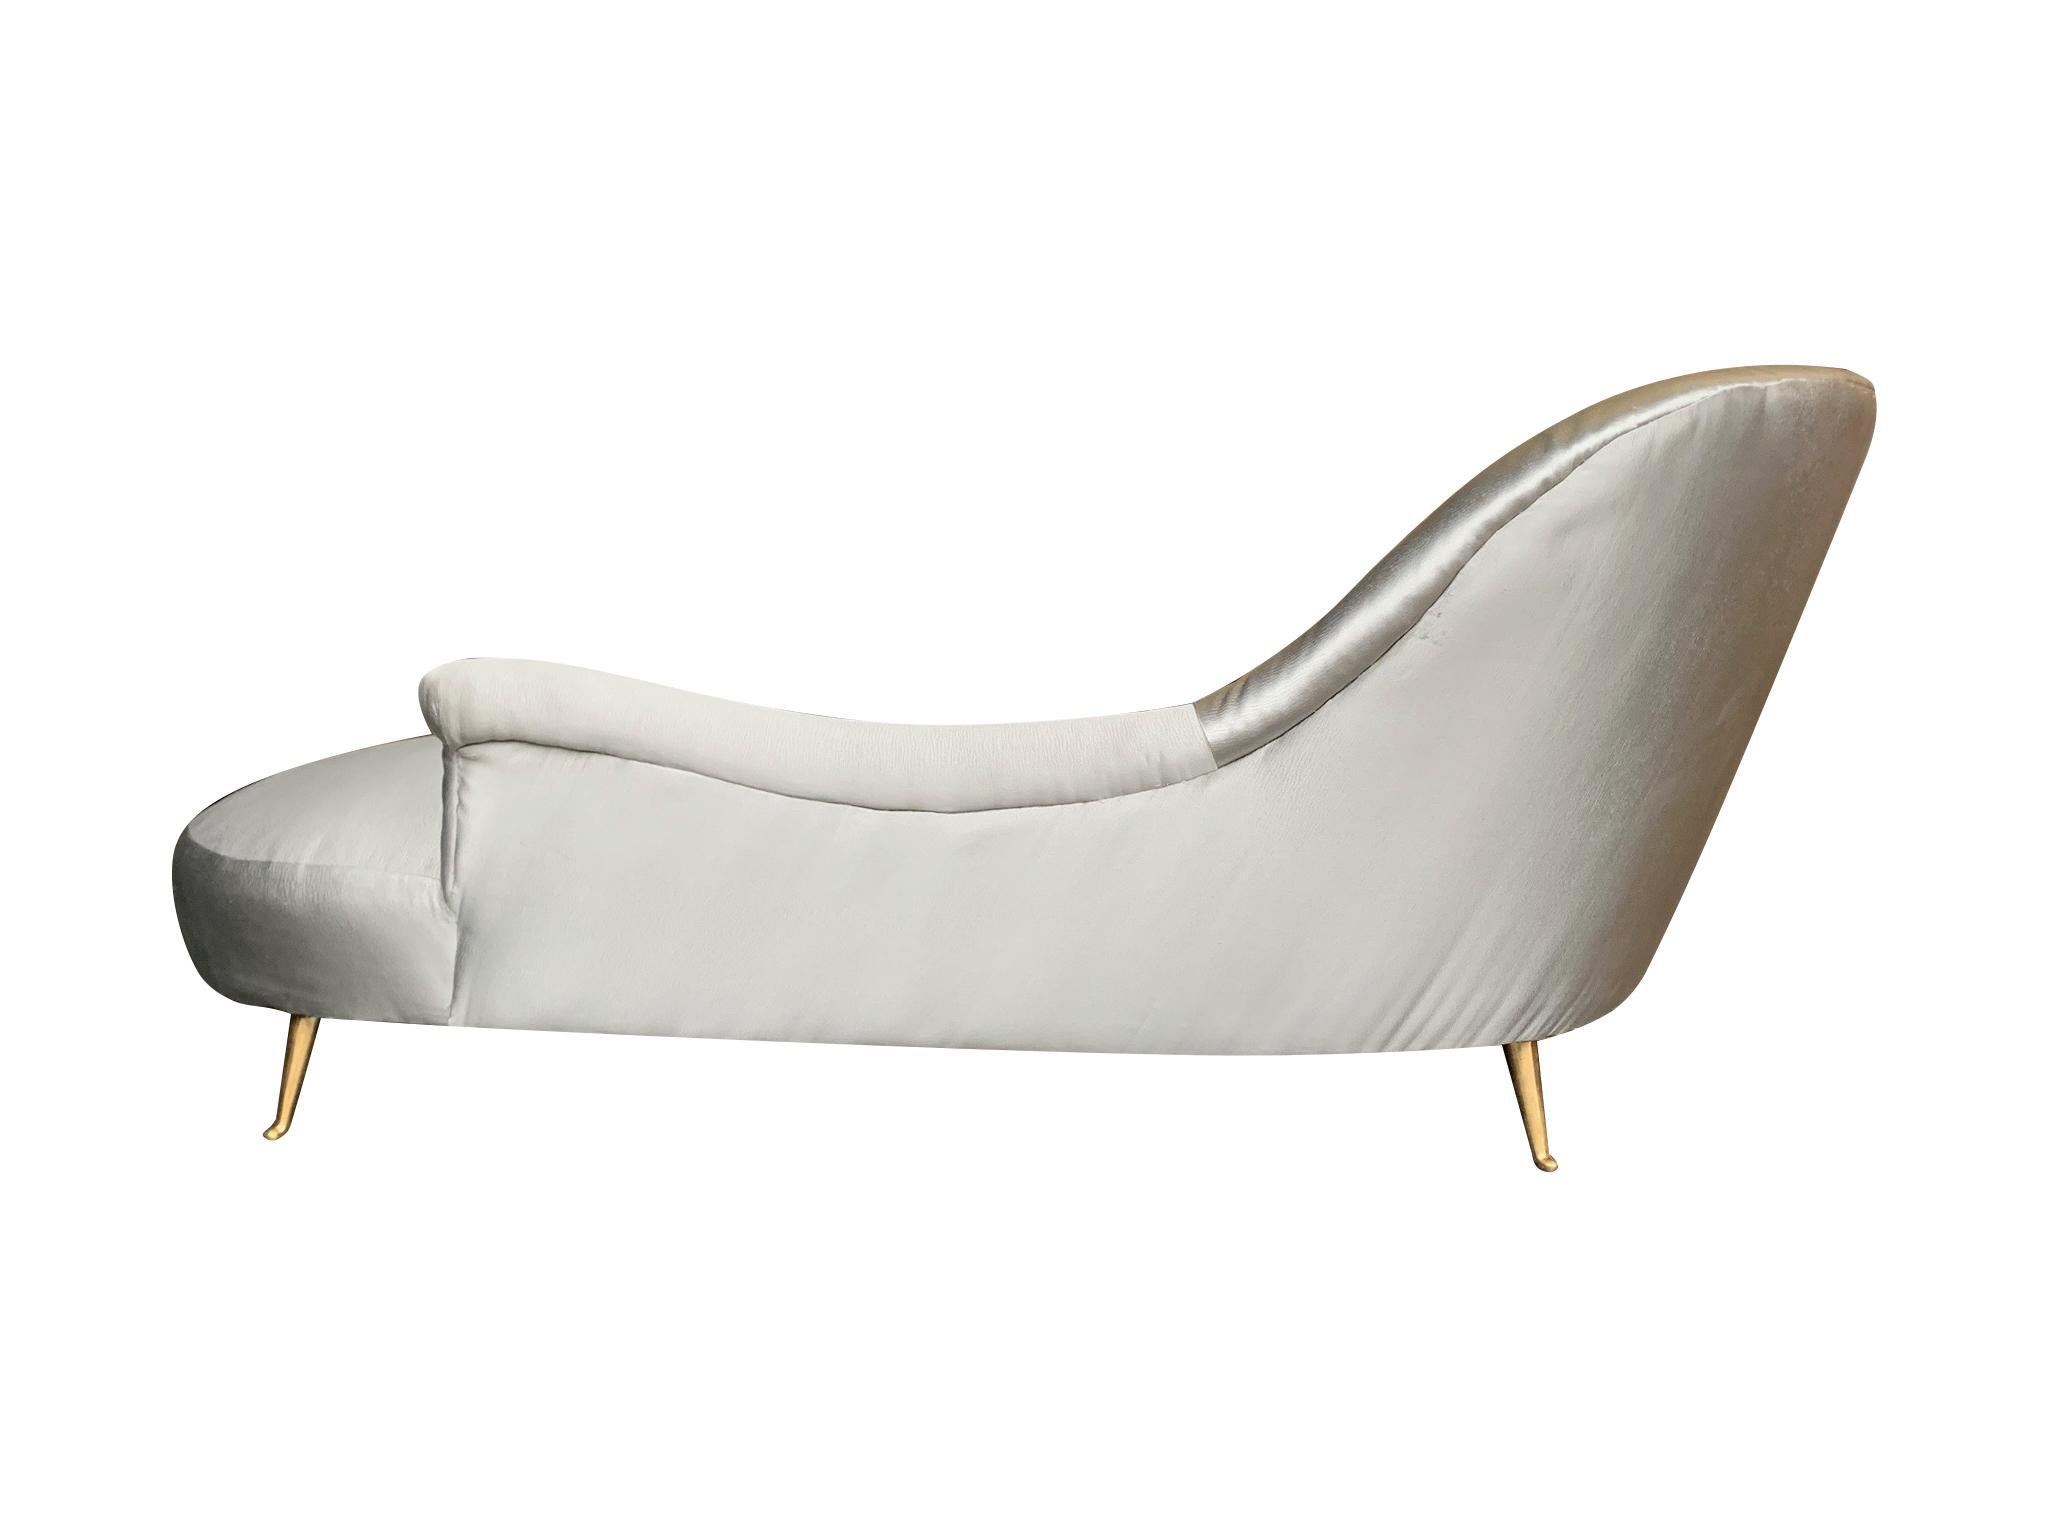 Italian Chaise Longue Upholstered in Silver Grey Fabric with Brass Feet 2